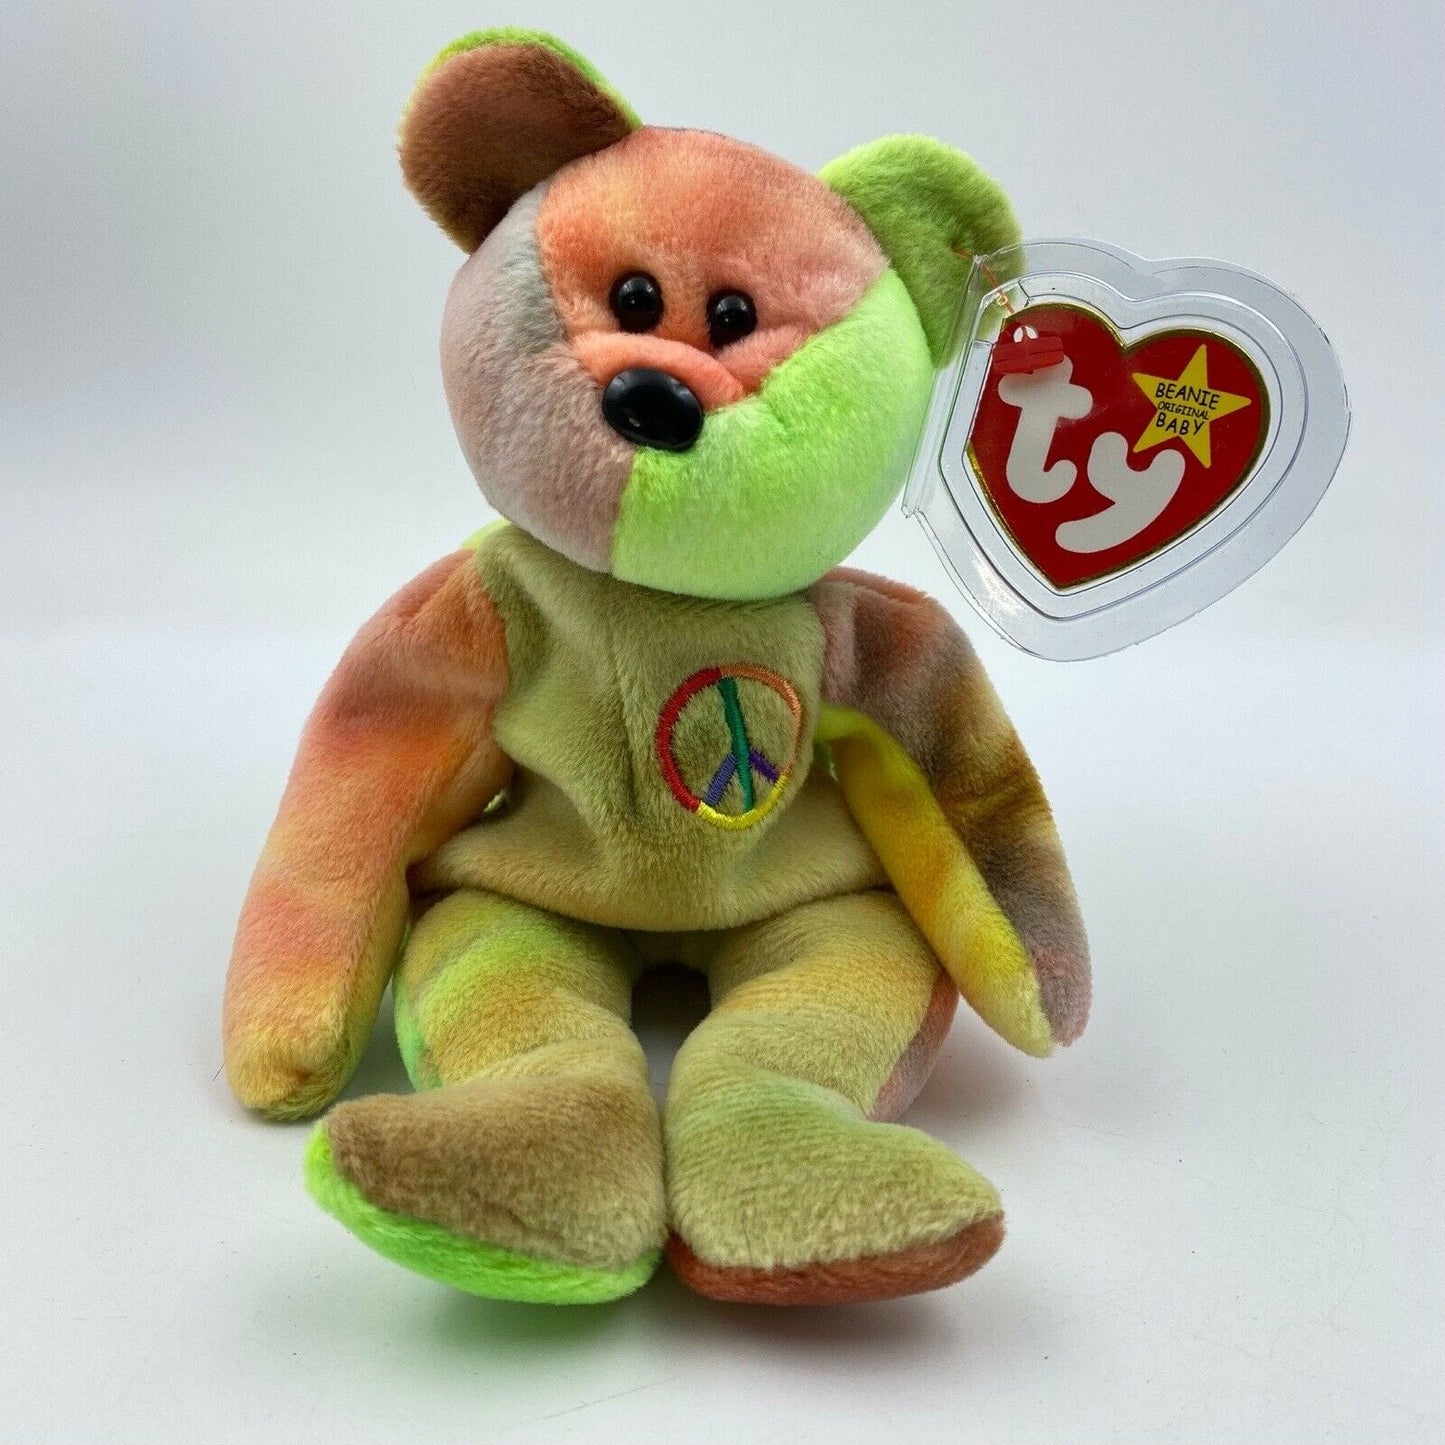 Ty Original Beanie Babies “Peace” Muted Tie Dye 1996 MINT Condition - Tag Errors